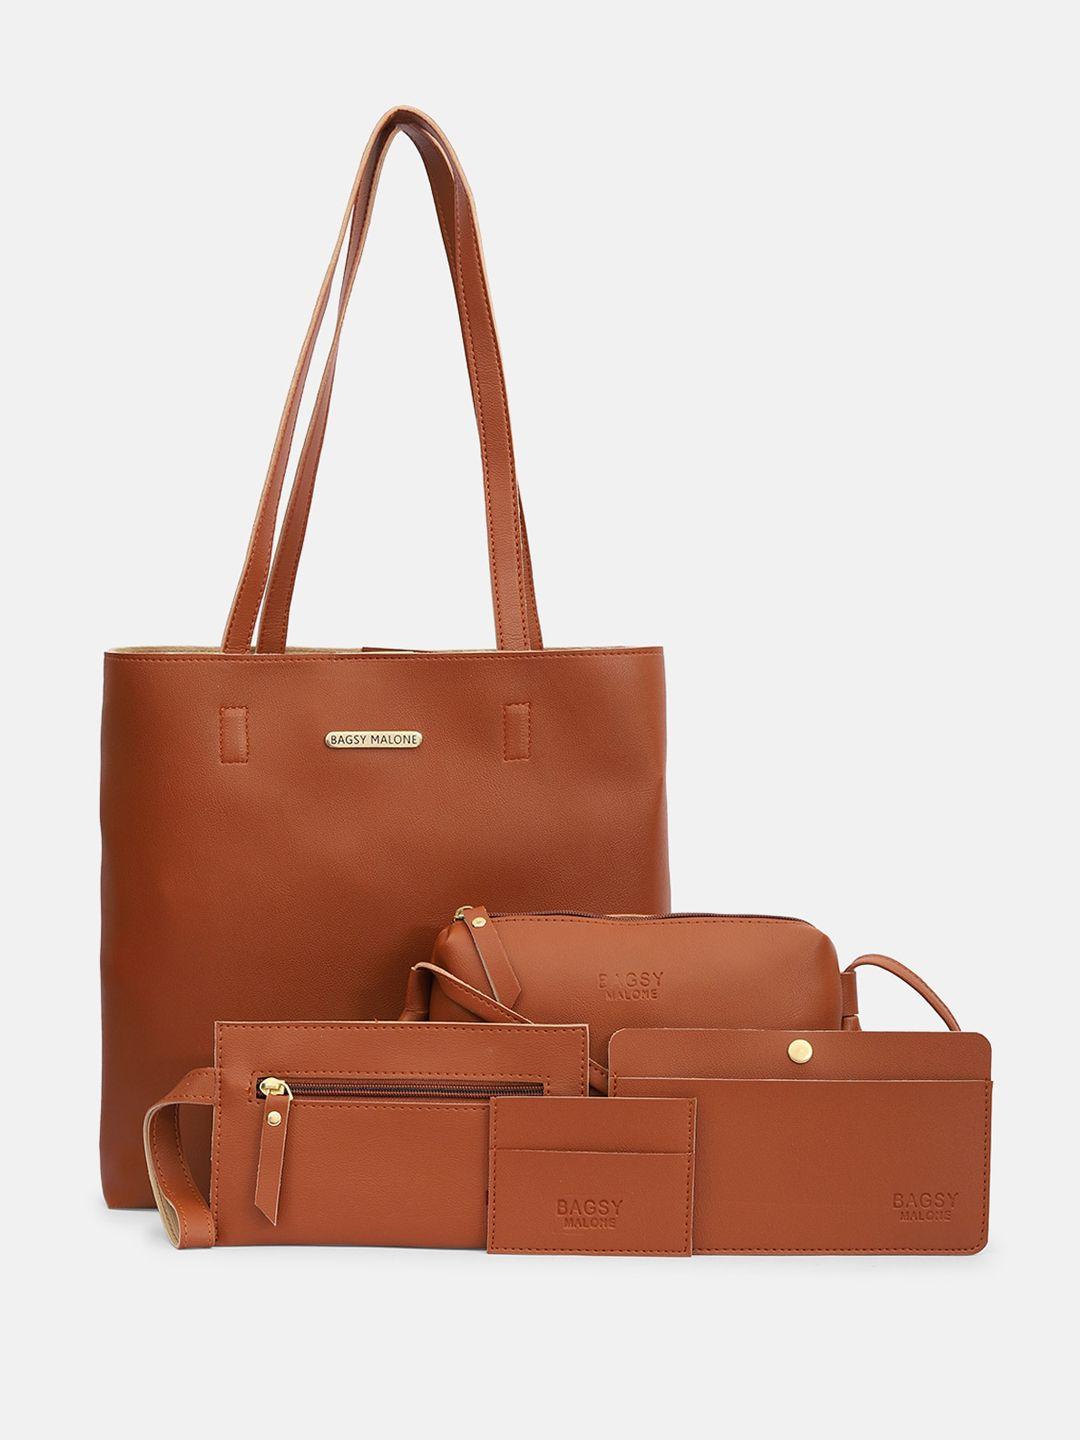 bagsy malone set of 5 structured vegan leather tote bag